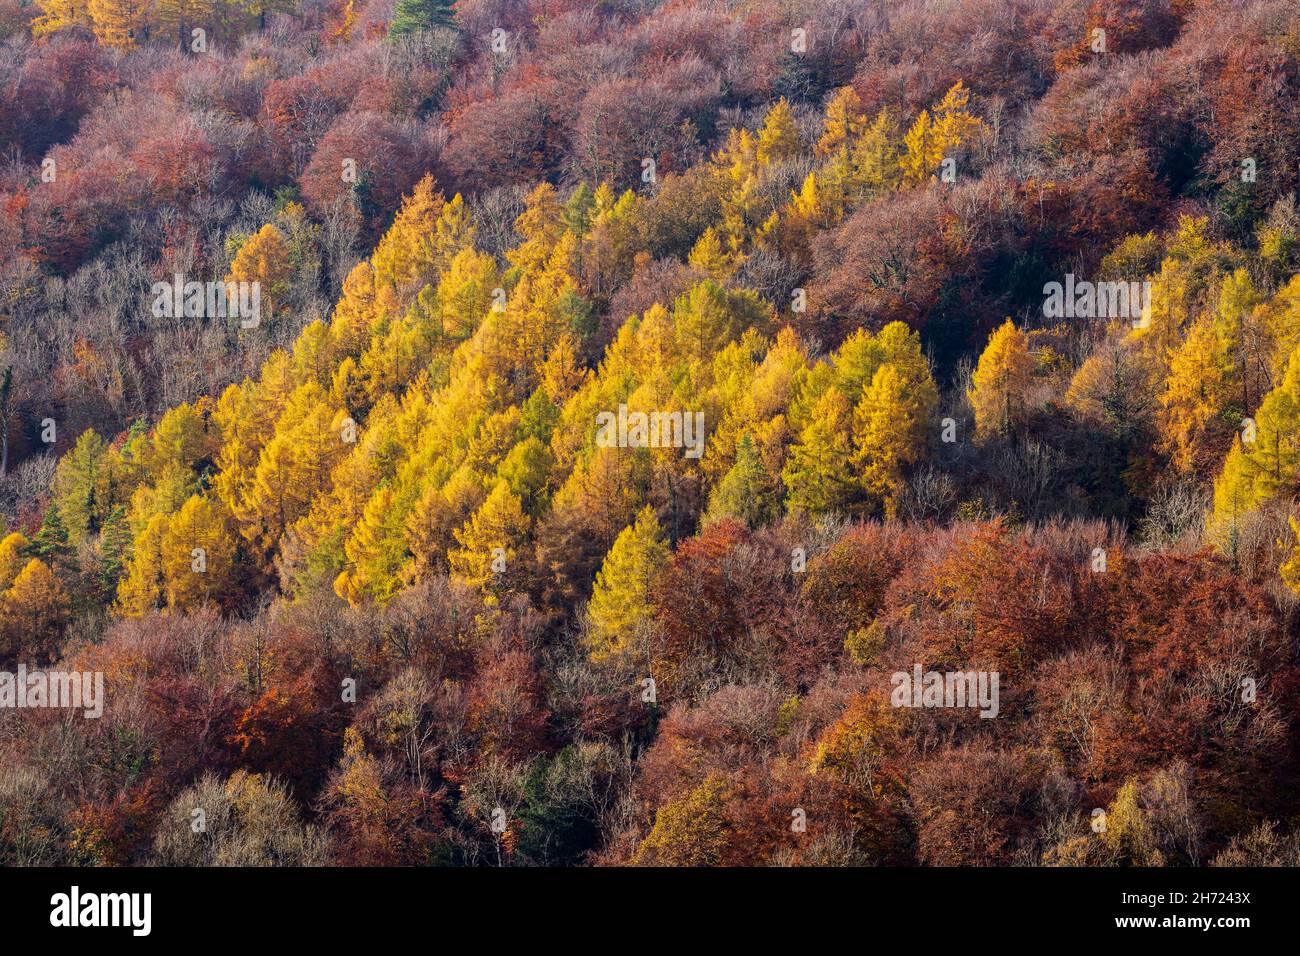 Farbenfrohe Herbstbäume im Symonds Yat Rock, Forest of Dean, Herefordshire, England Stockfoto